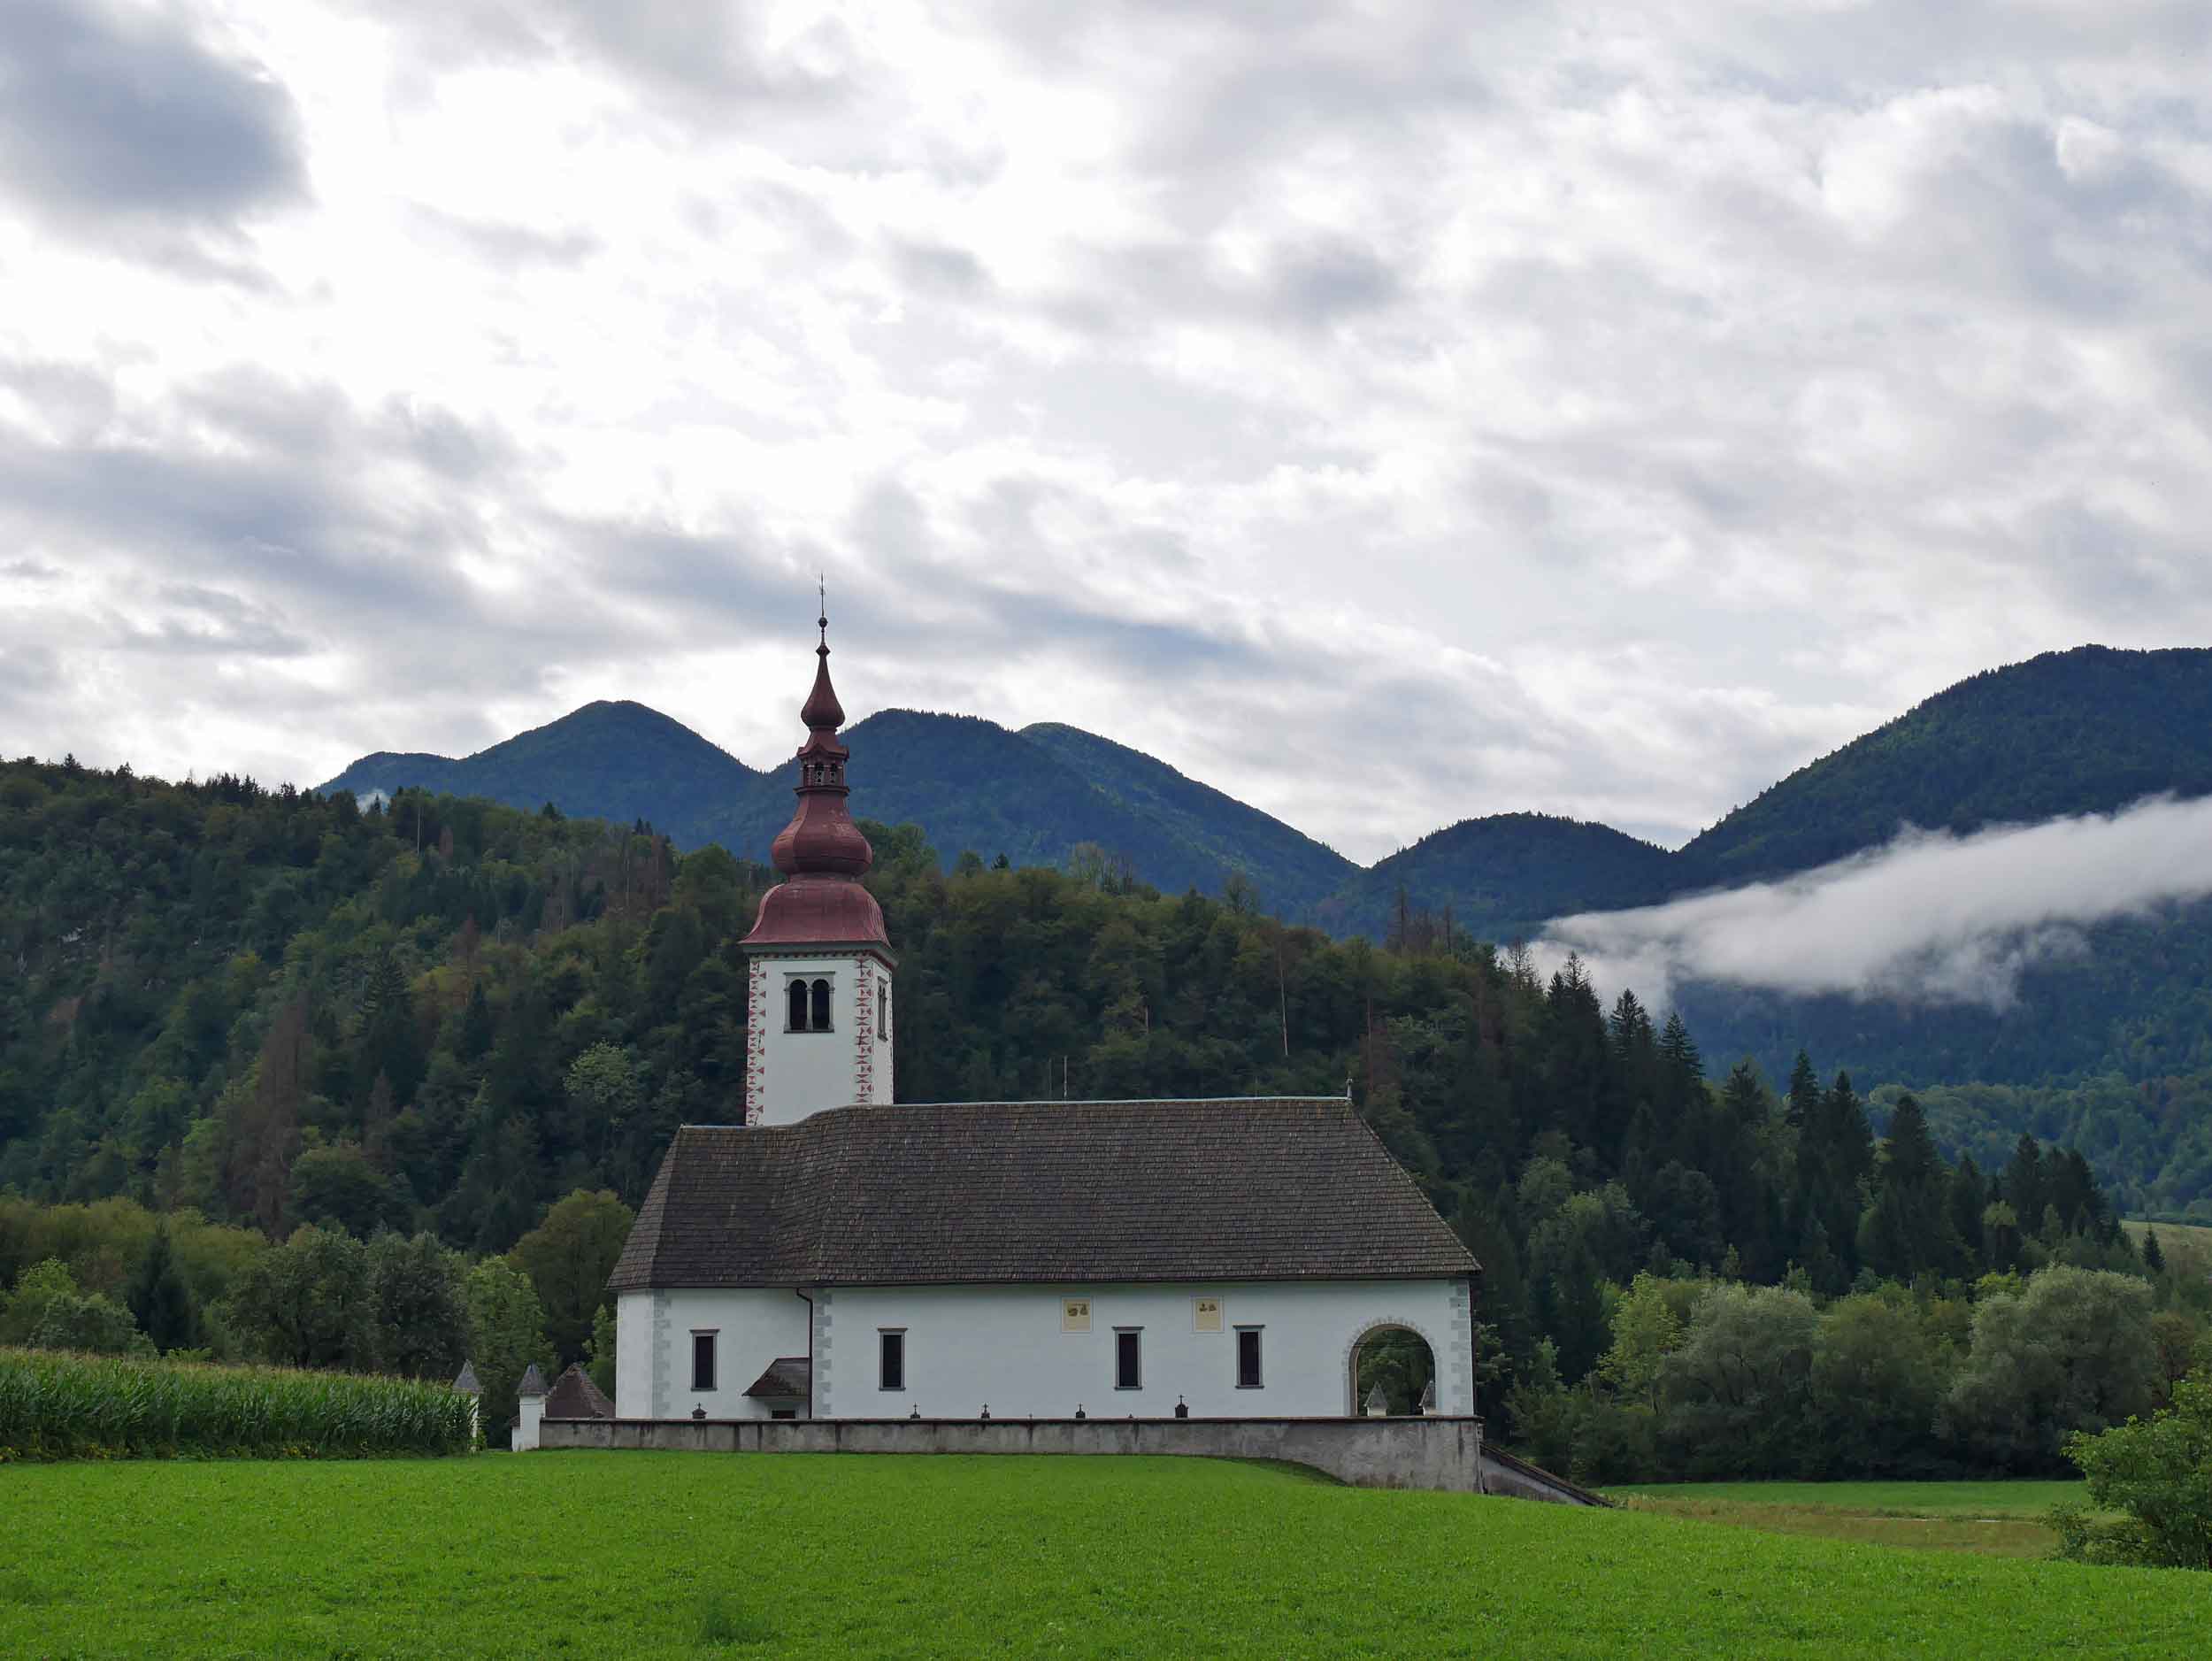  Because of its location, Slovenia is at a cross-roads of many different cultures and trade routes, which is showcased in its architectural varieties.&nbsp; 